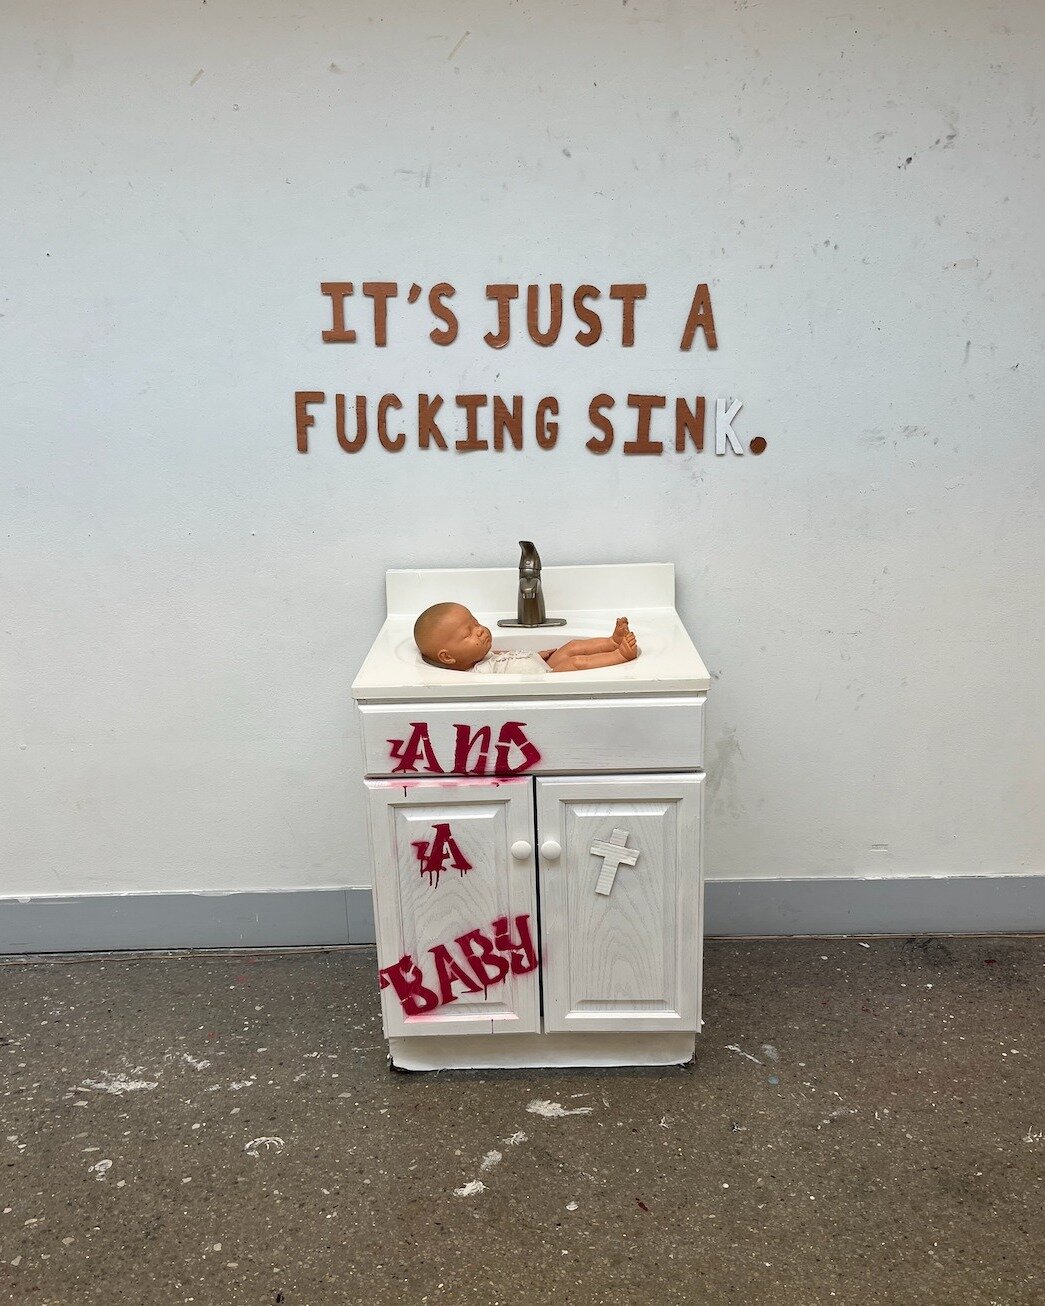 &ldquo;Ducks in a Pond&rdquo;, the 2023 BA Thesis Exhibition, opens FRIDAY, March 24th, 6-8pm
.
Link in Bio
.
1. Collin Amelsberg, &ldquo;The Virgin and The Child&rdquo;, 2023. Found Objects, Spray Paint, Cardboard, Acrylic Paint
2. Evelyn Andreoli, 